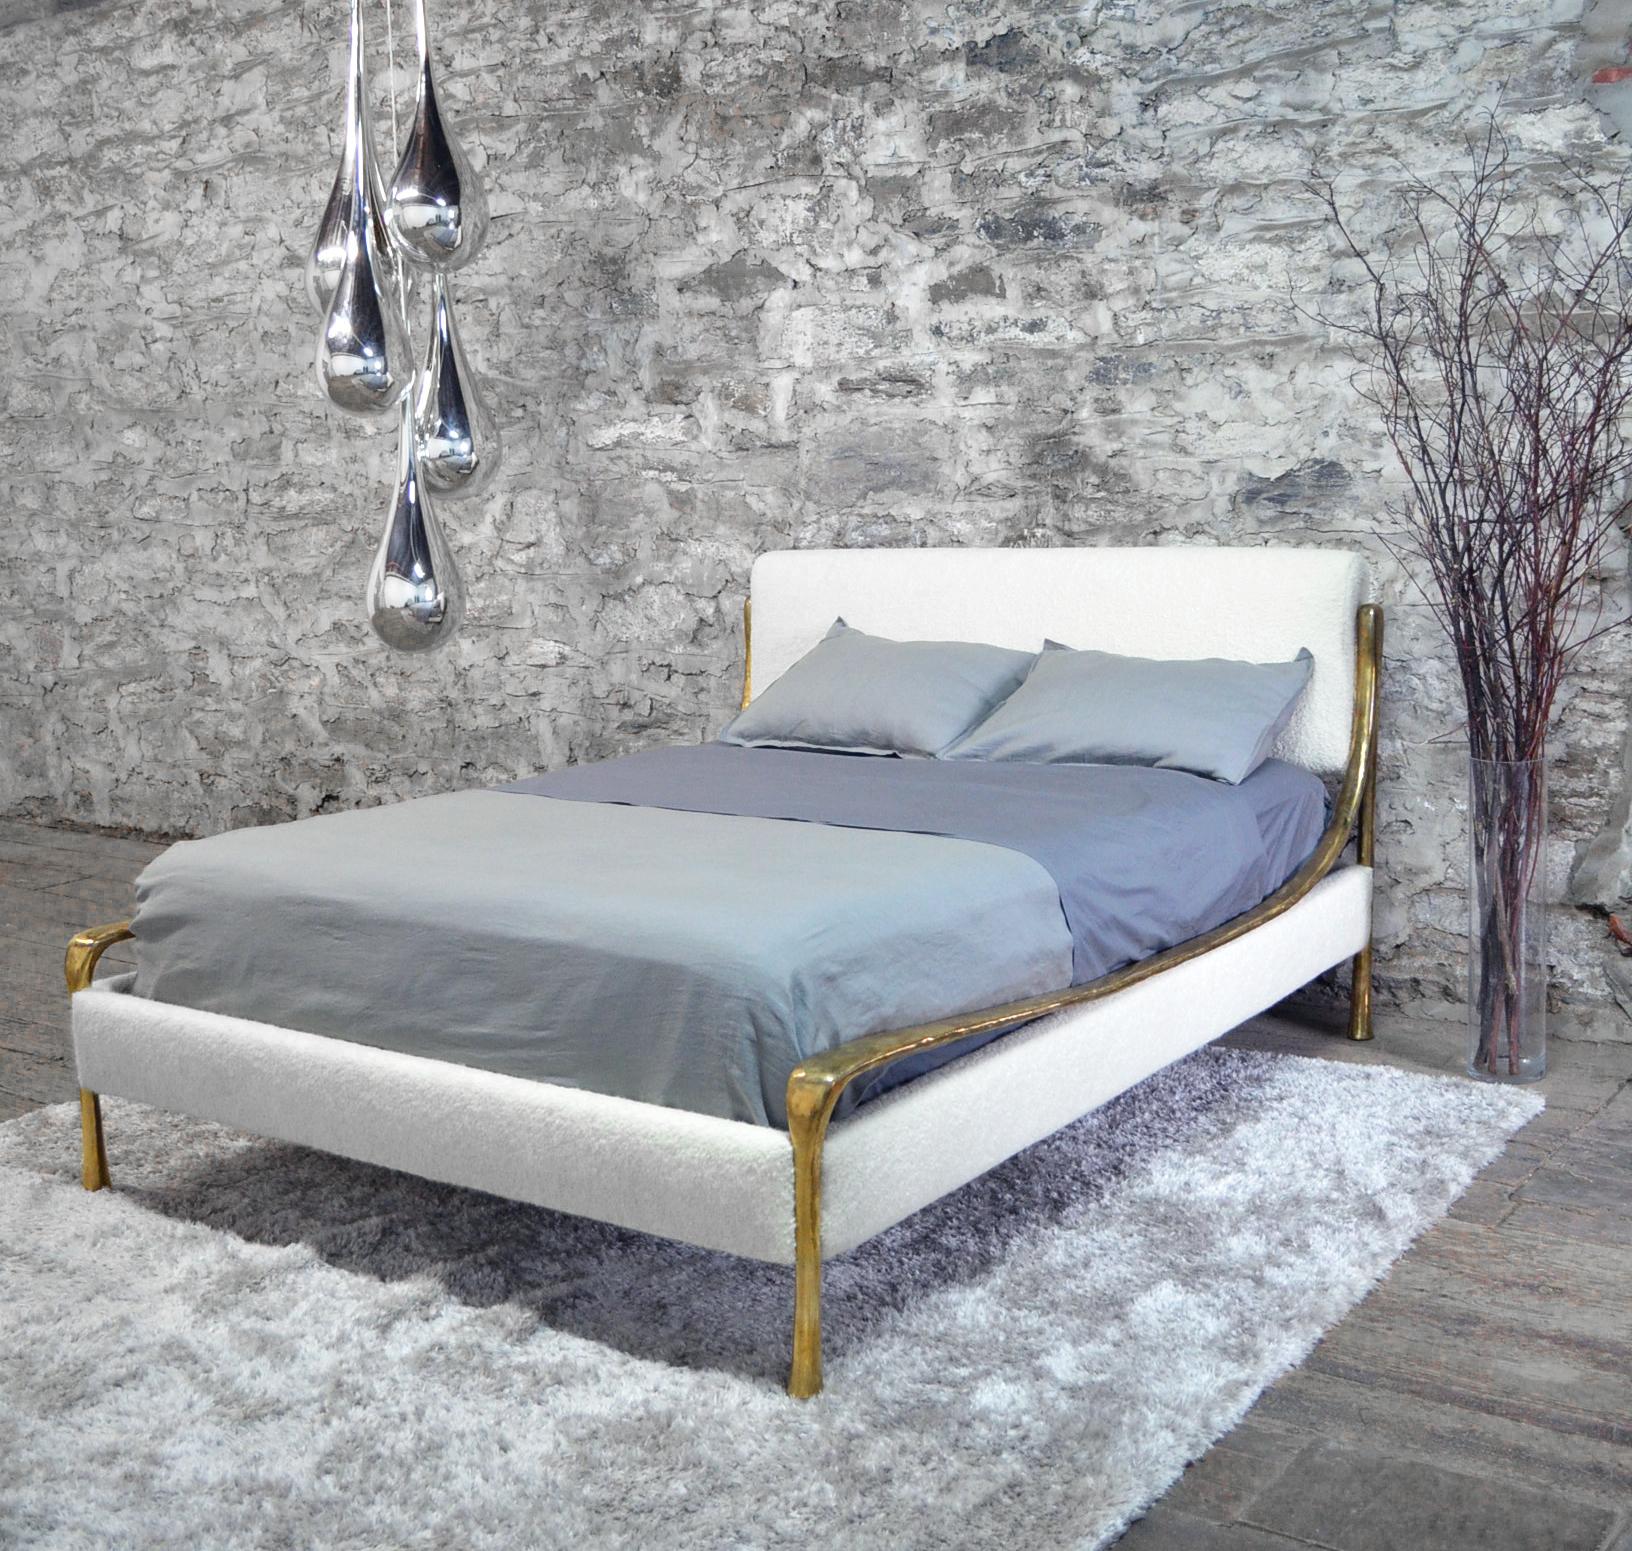 With its sinuous, classical line, the Giac collection is named after Giacometti, its inspiration. The collection provides an elegant and sleek option that appears delicate but has incredible gravitas. 

The Giac bed frame is made to fit your exact